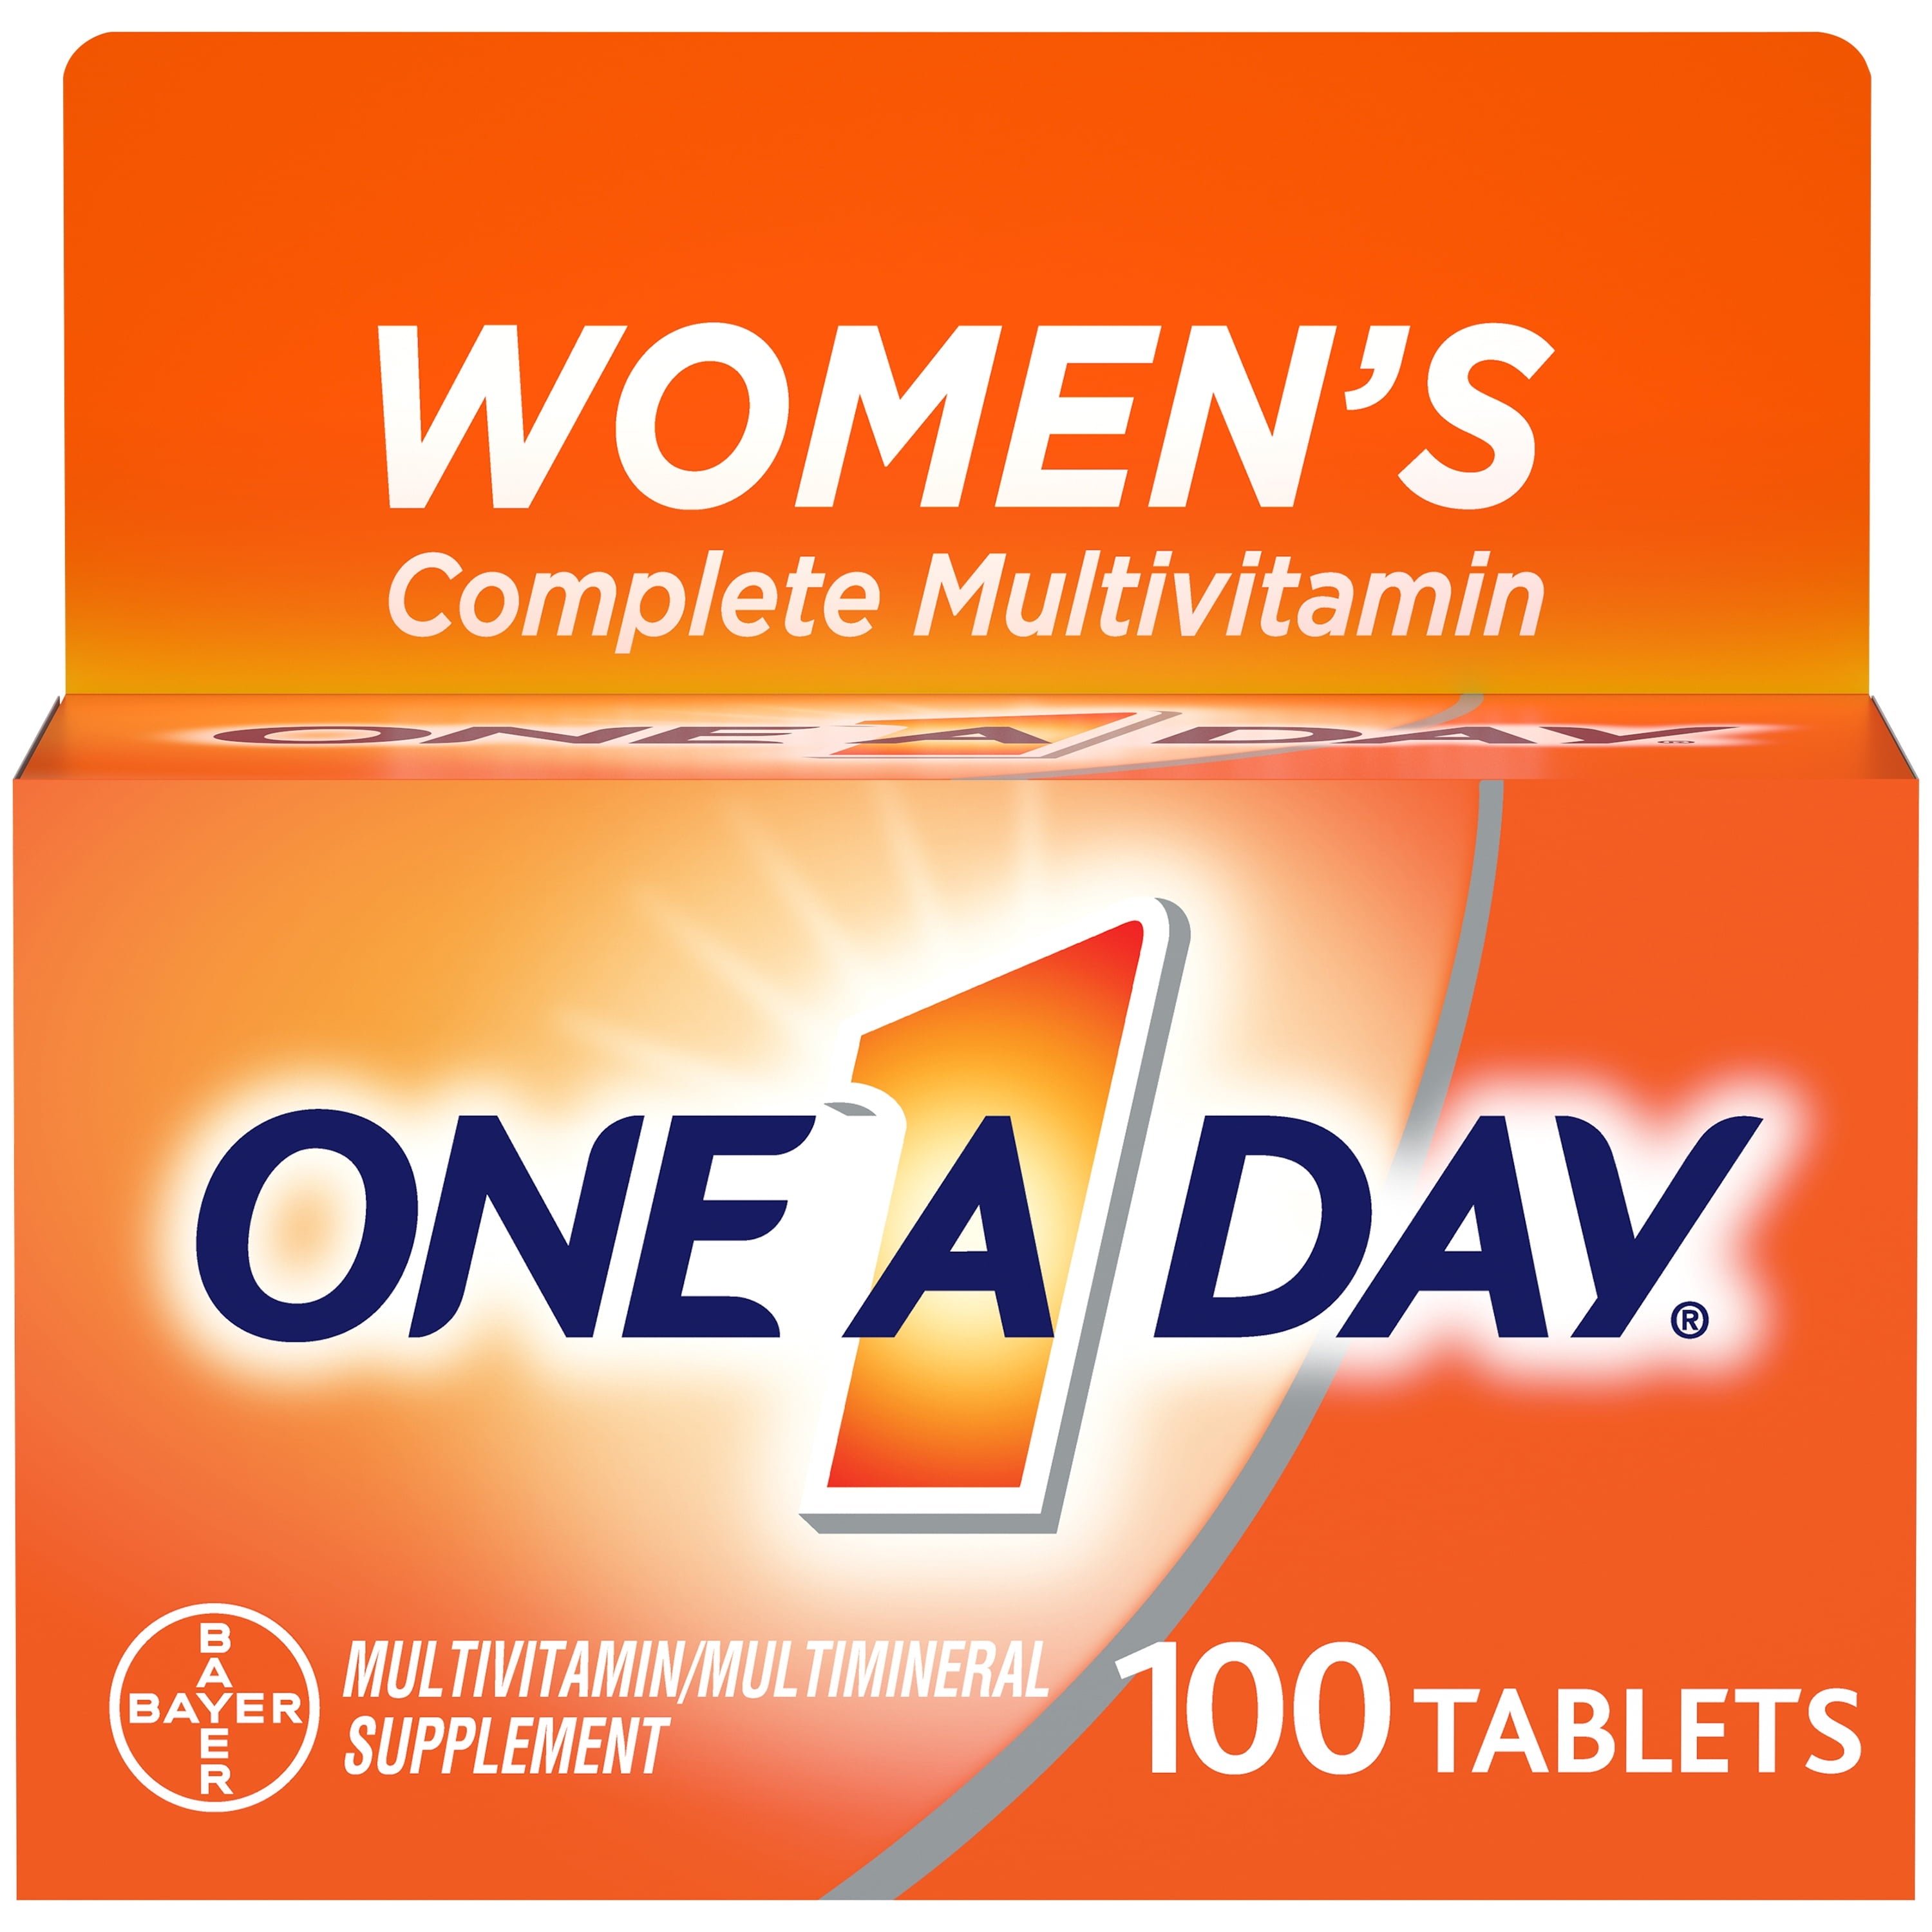 One A Day Women's Multivitamin Tablets X 100